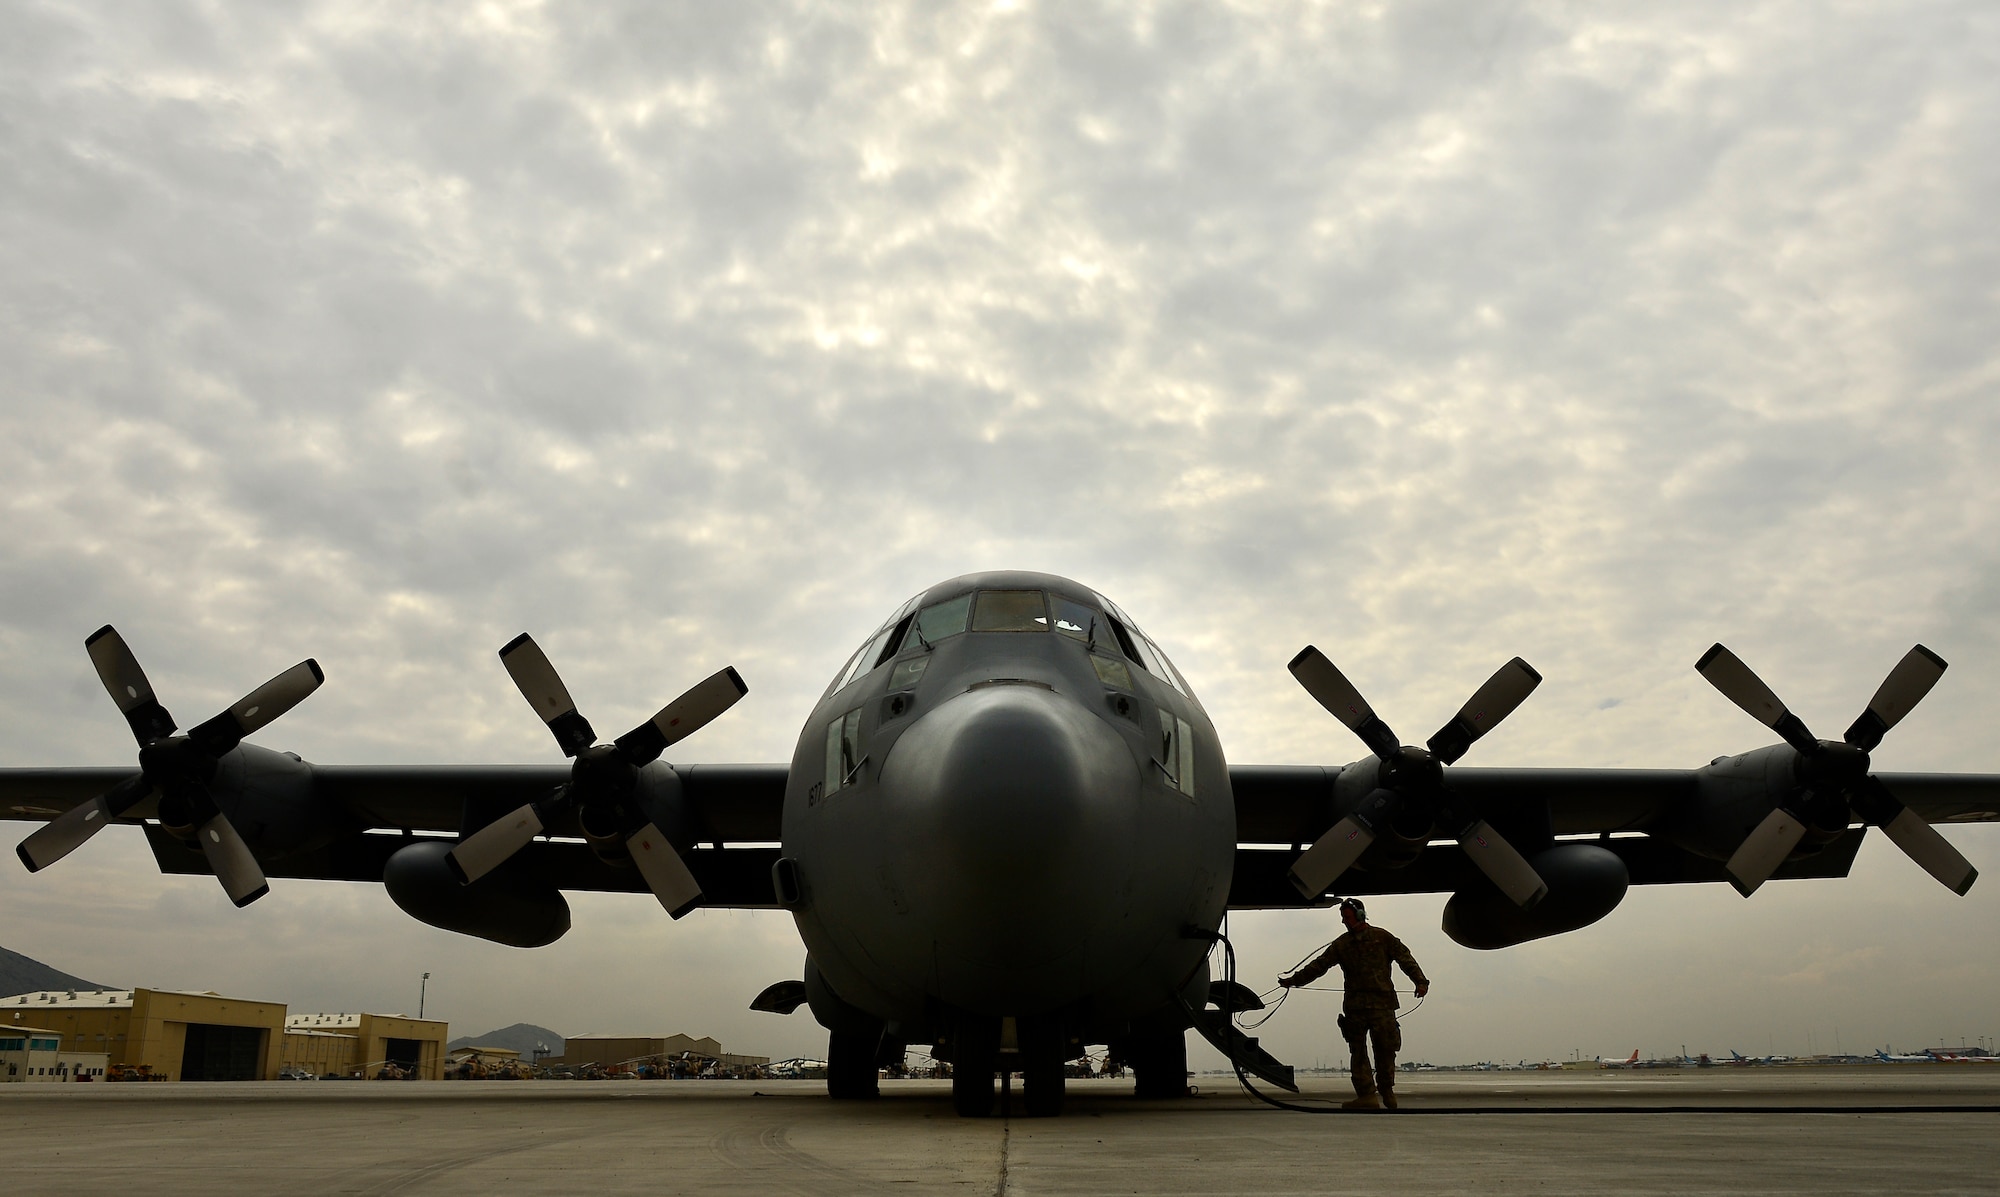 Tech. Sgt. Aaron Parkinson, 440th Expeditionary Advisory Squadron, C-130 Hercules crew chief, performs a pre-flight inspection, Kabul, Afghanistan, May 19, 2014. Parkinson and aircrew assigned to this C-130H1, are preparing the aircraft to transport Afghan Nation Army human remains. Parkinson, an Atlanta,Gerogia, native, is deployed from the 314th Aircraft Maintenance Unit, Little Rock, Arkansas. (U.S. Air Force photo by Staff Sgt. Vernon Young Jr.)